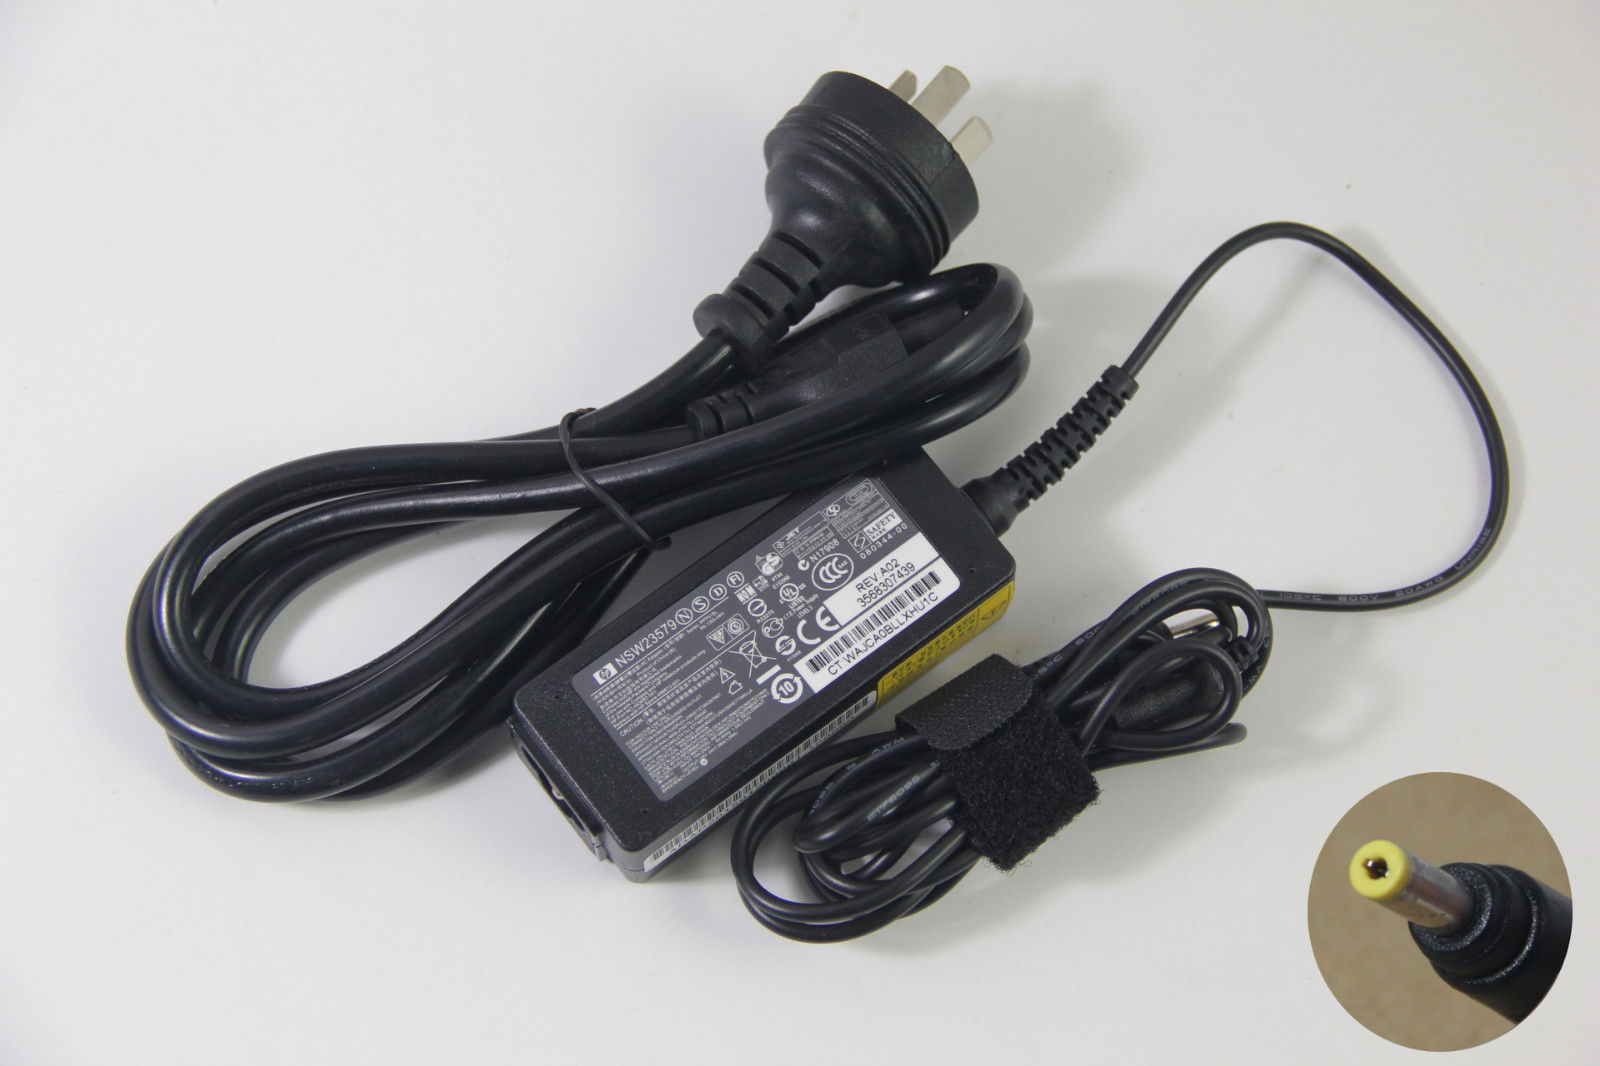 19V 1.58A 30W Genuine OEM AC Adapter For HP Slate 500 PPP018H 534554-002 A0301R3